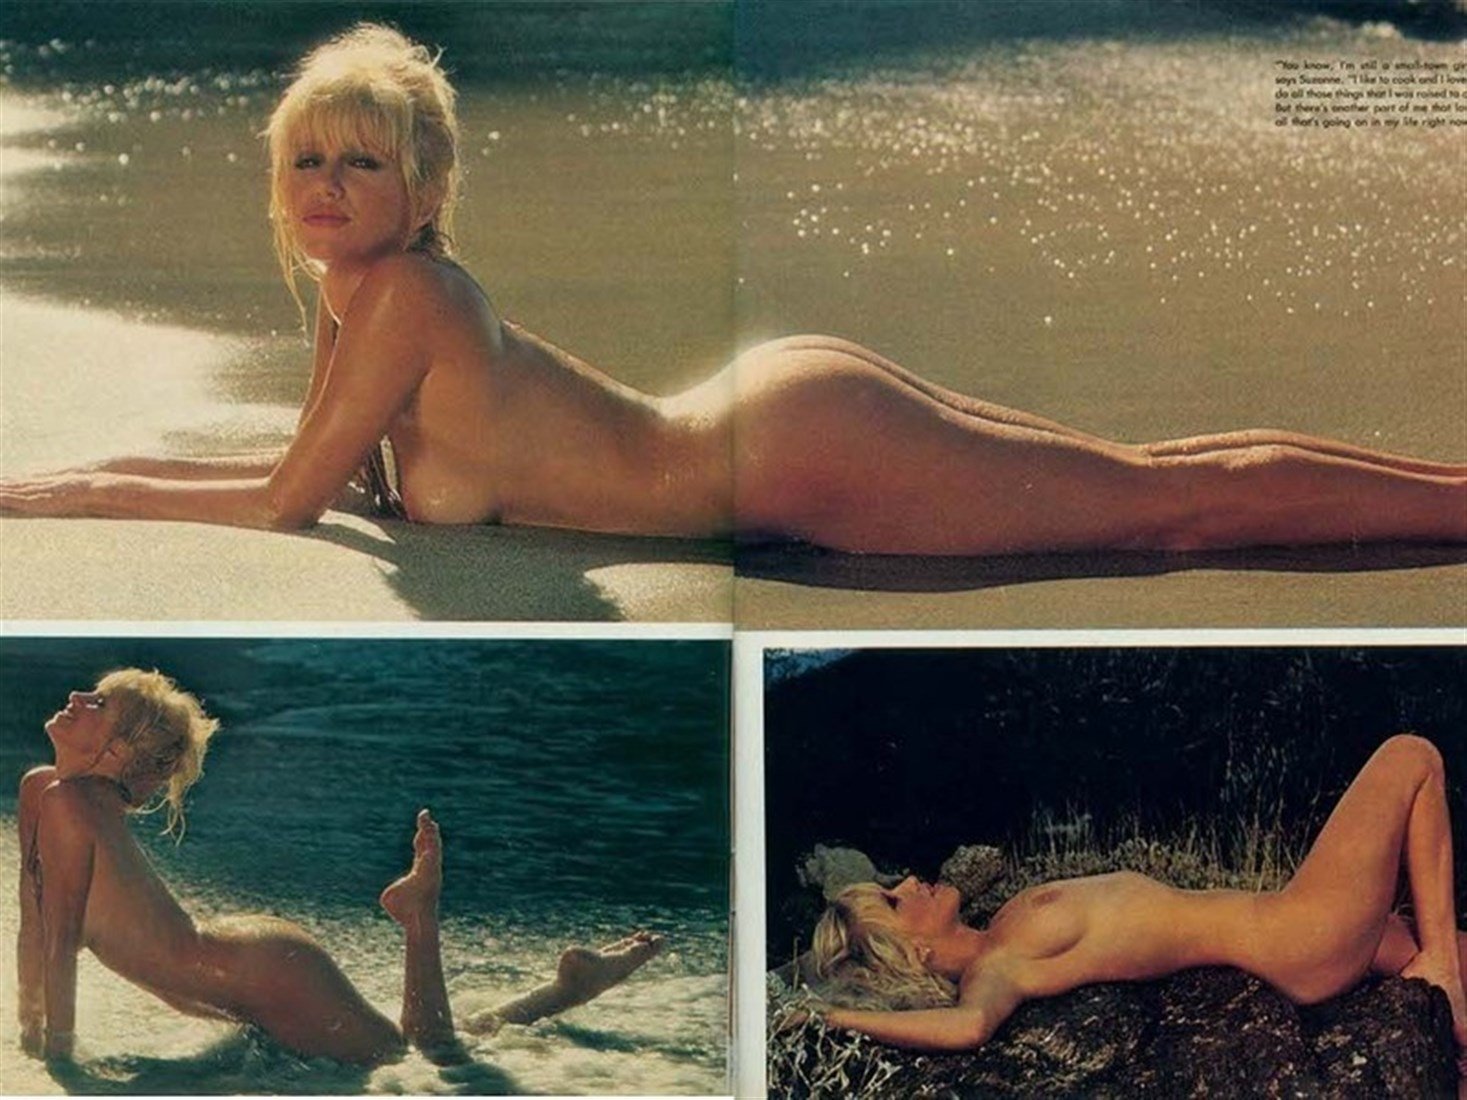 Somers nude suzanne Suzanne Somers. 